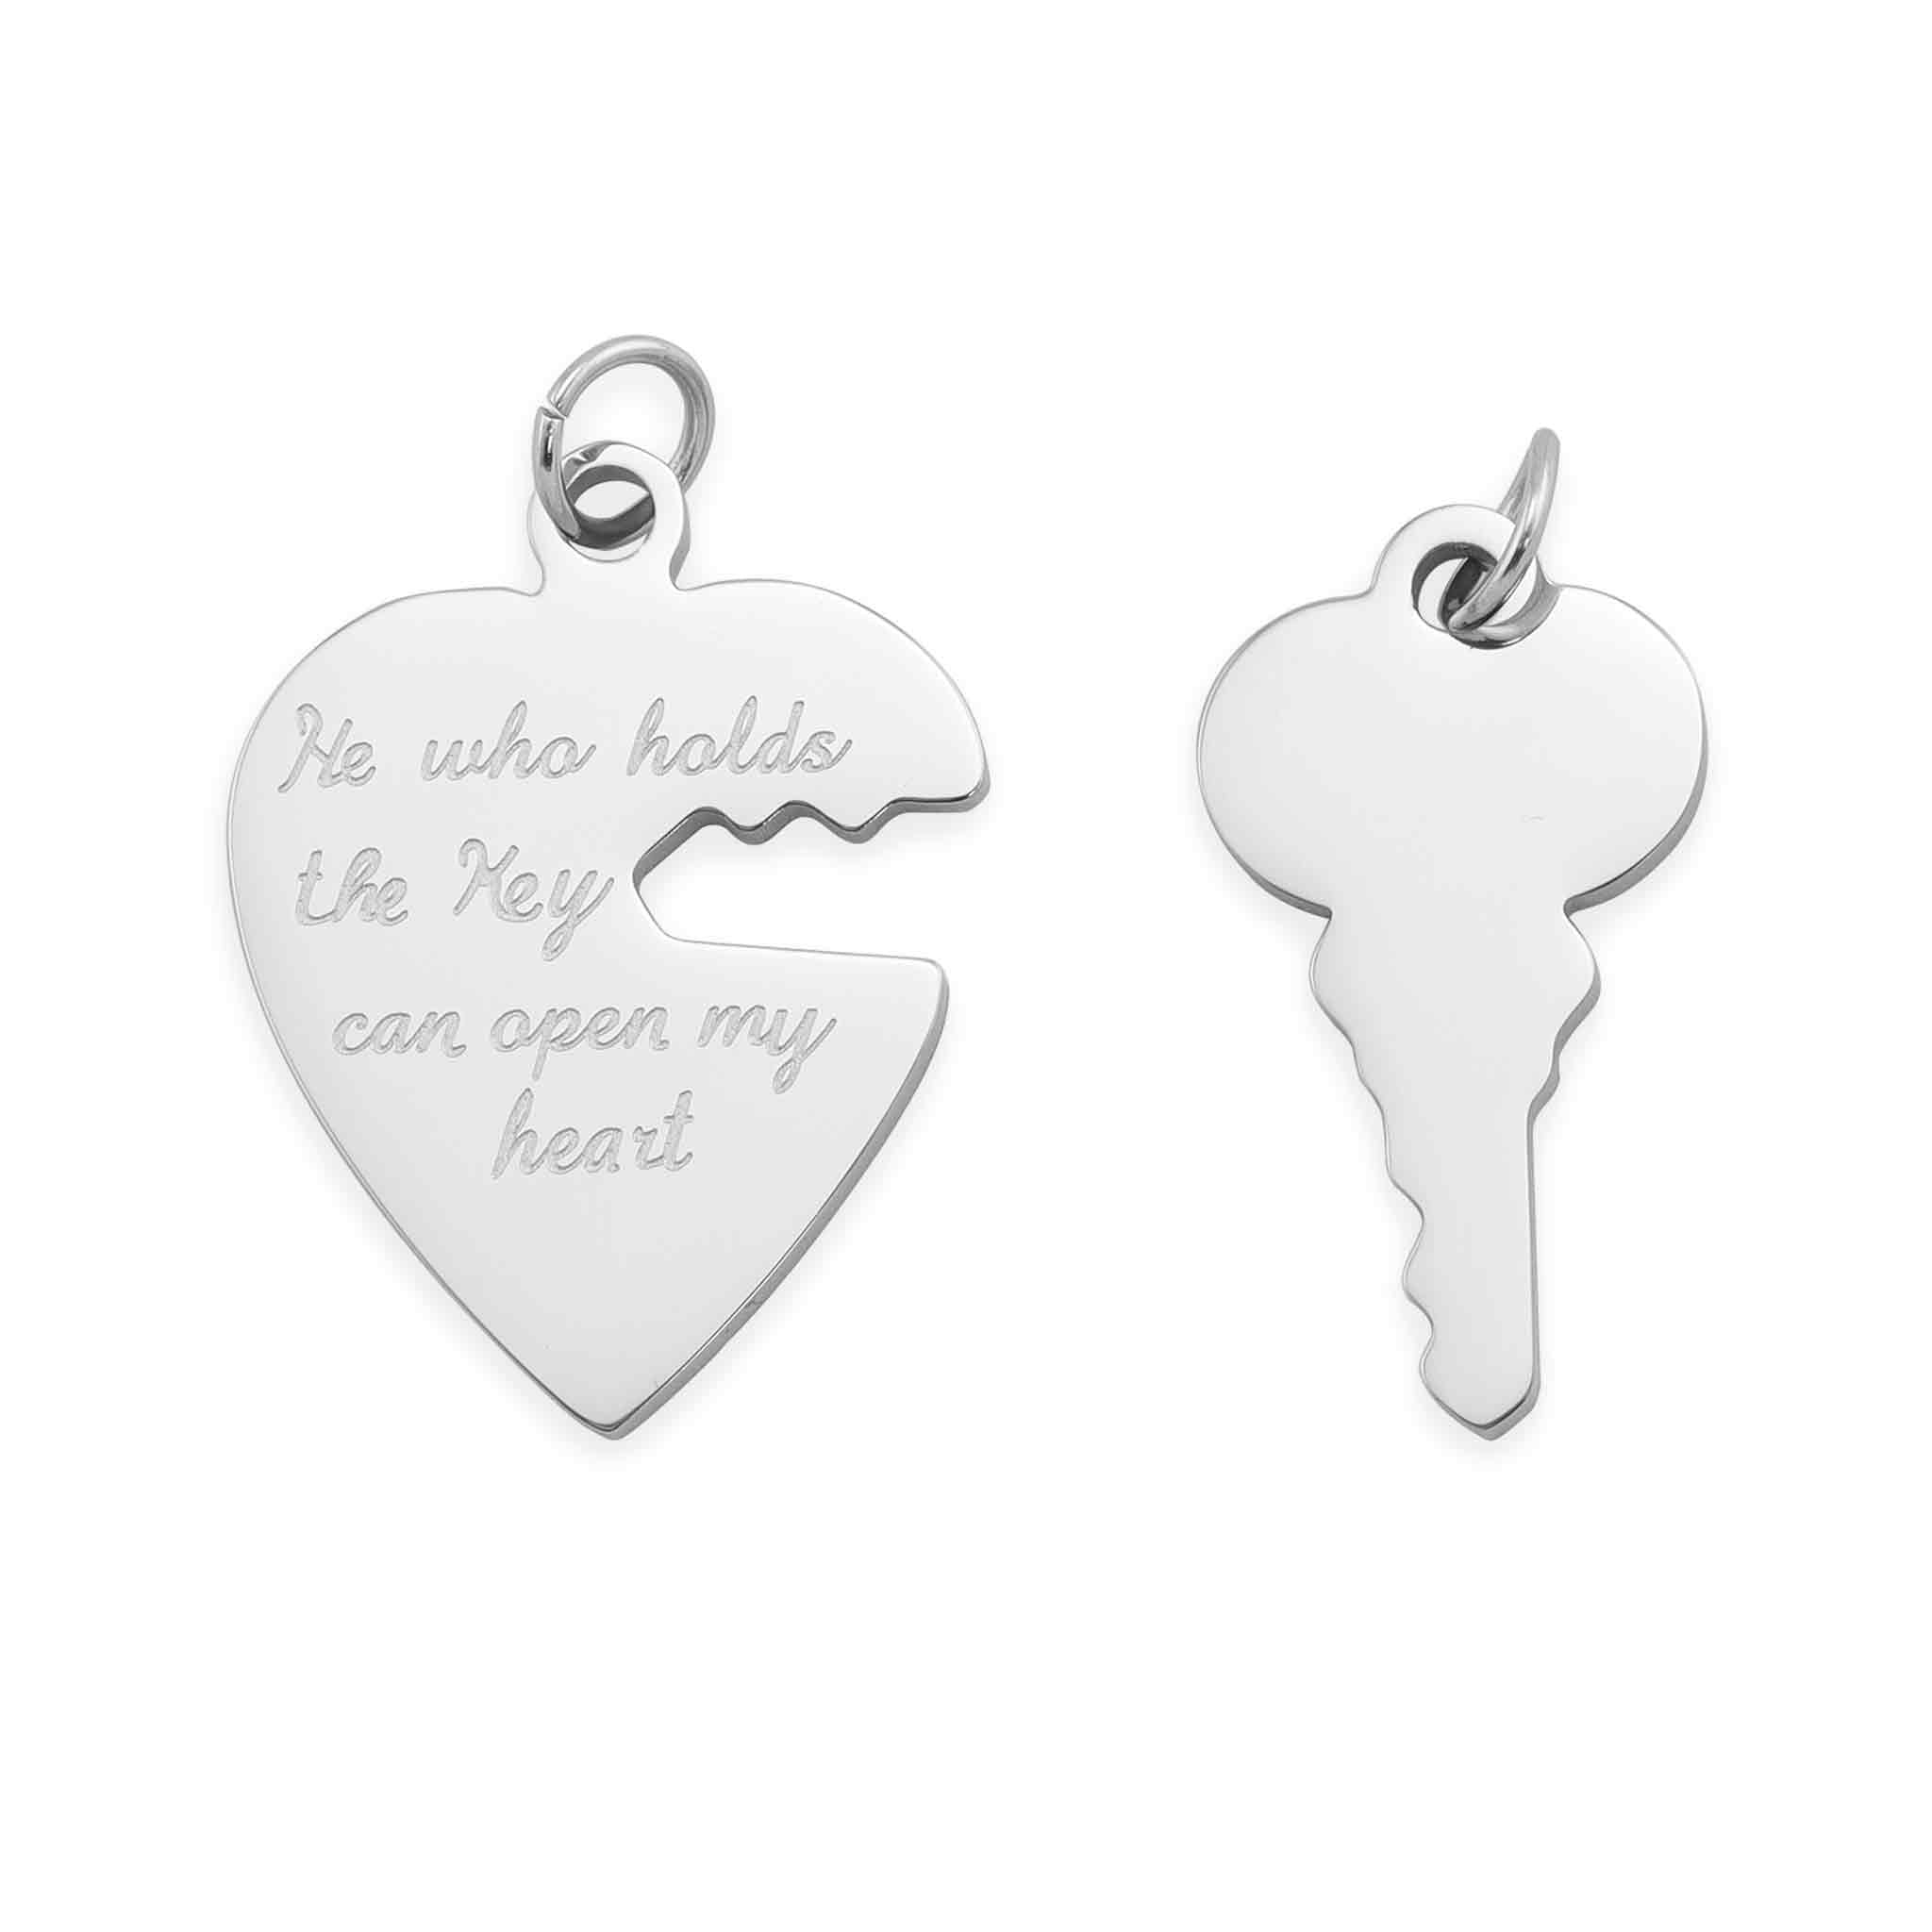 Heart And Key Stainless Steel Pendant / SBB0070